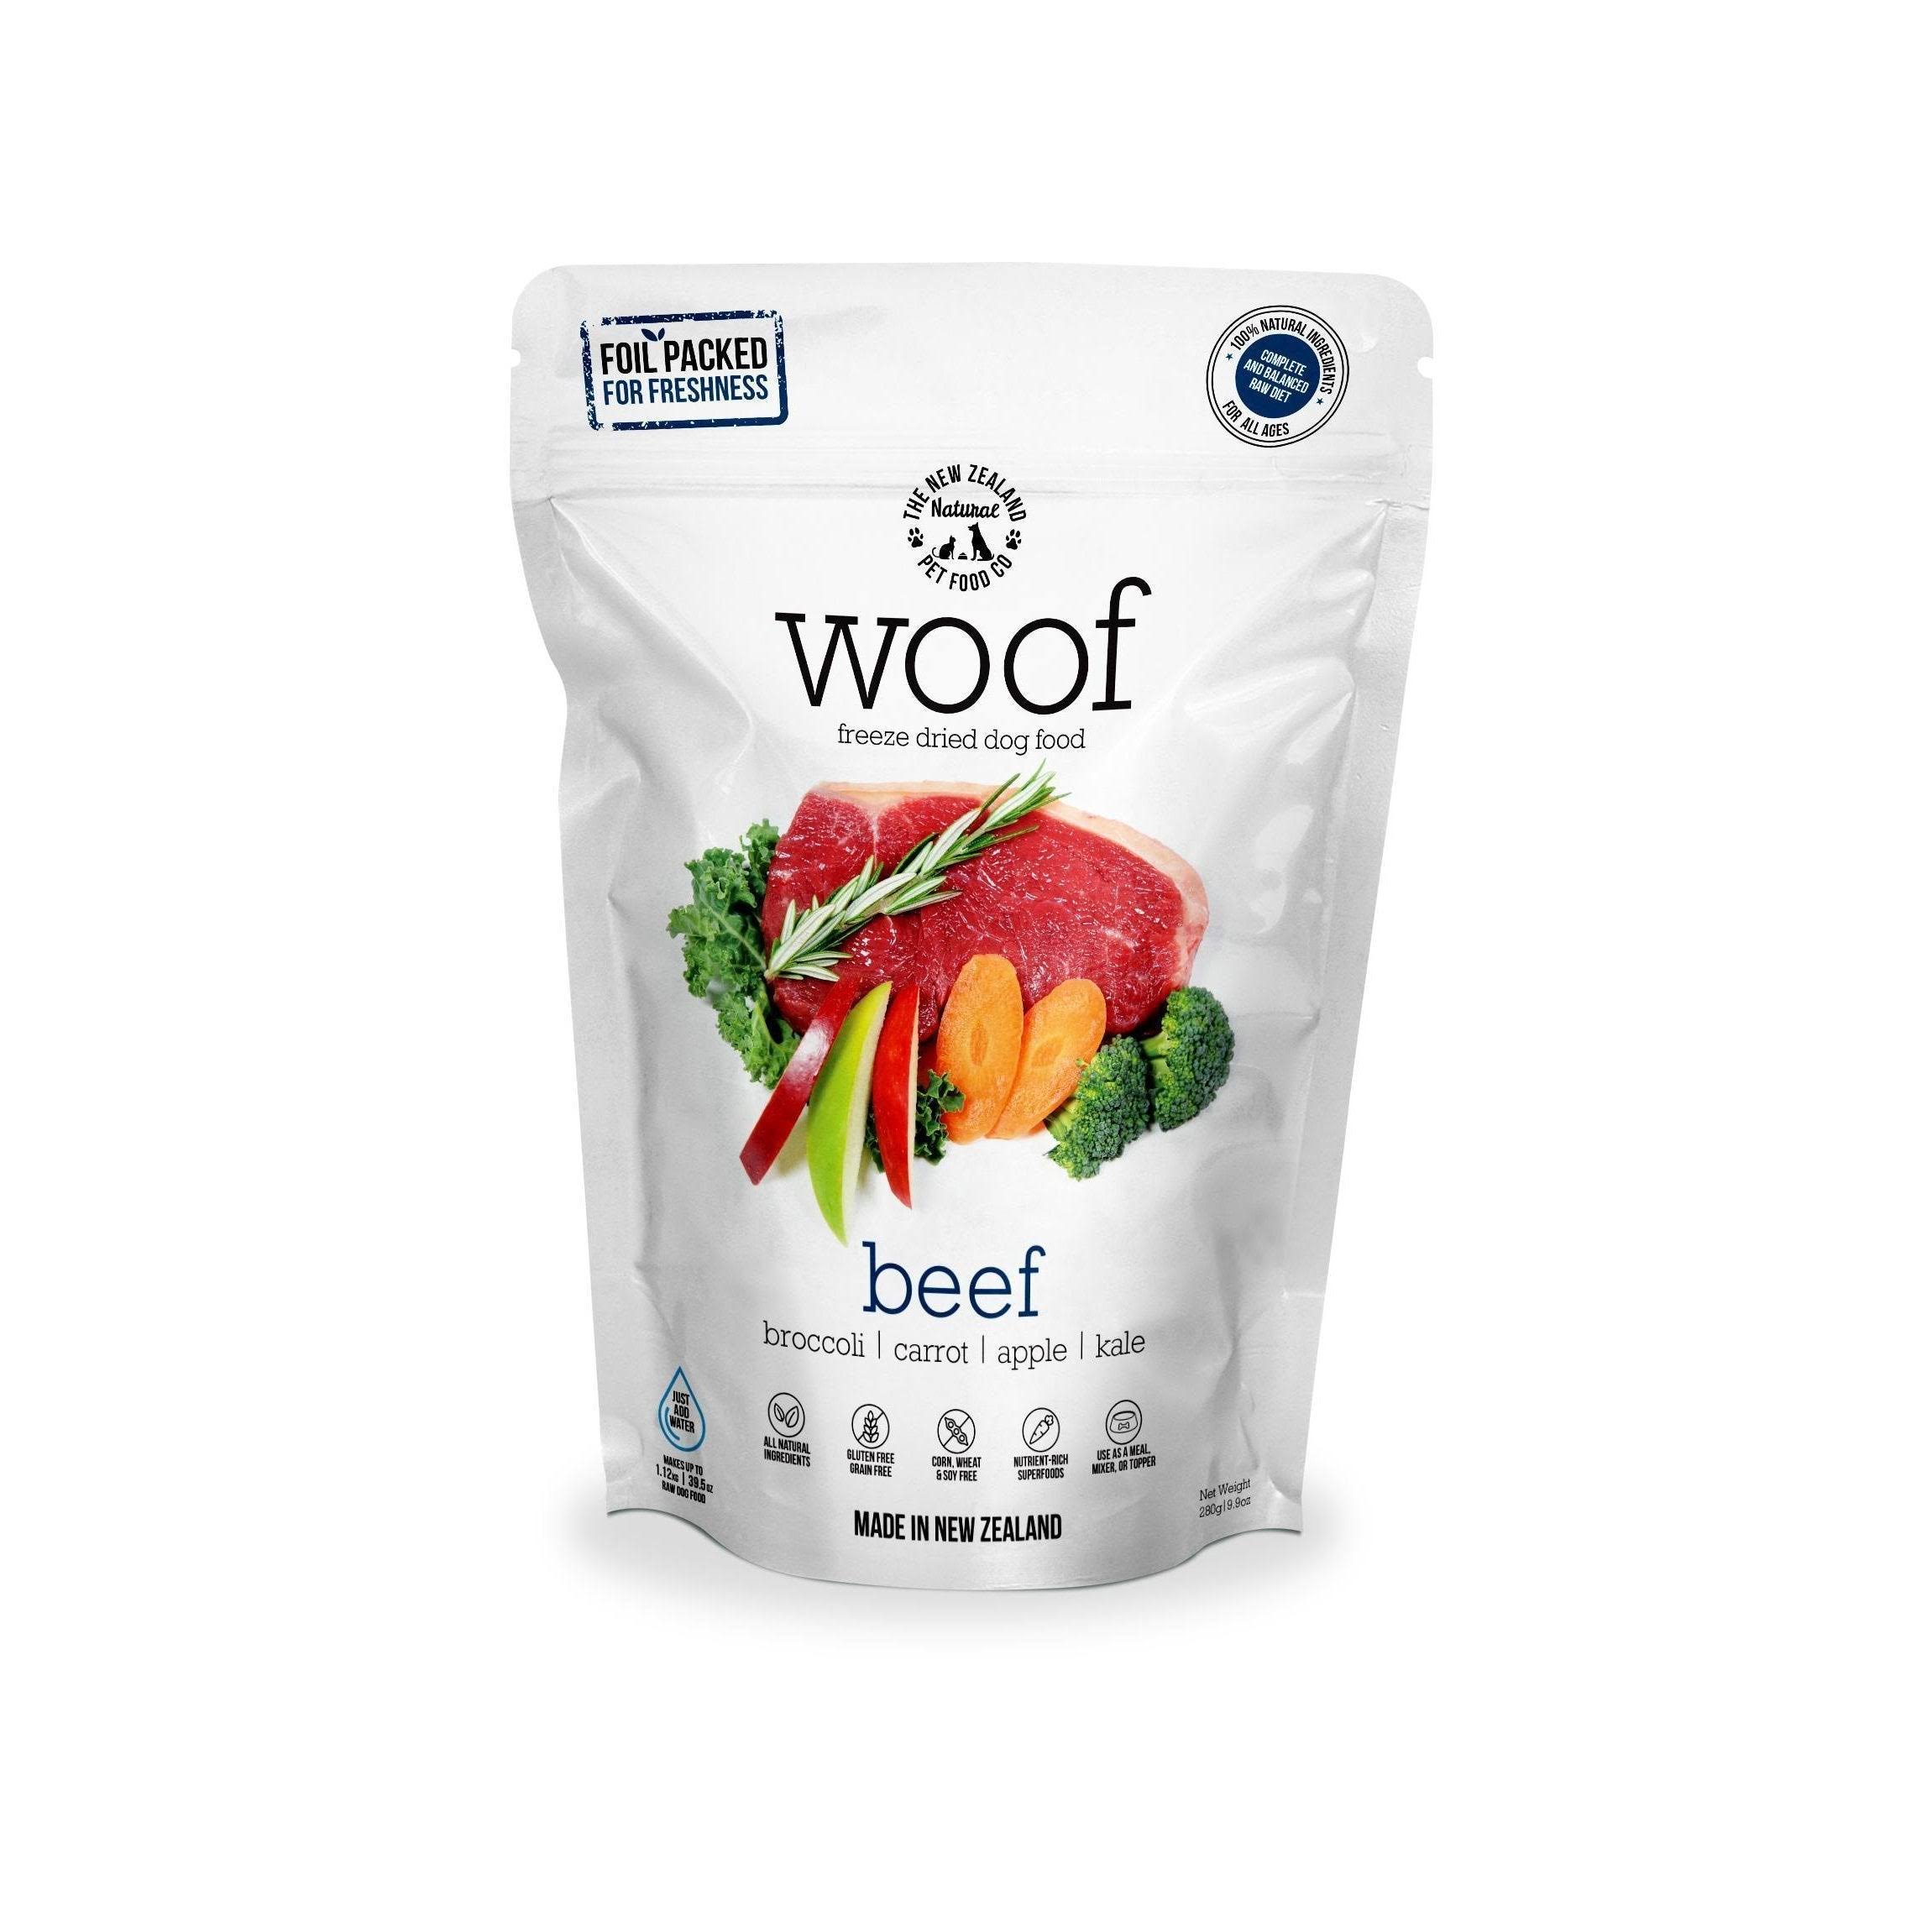 Pet Pacific Woof Freeze Dried Dog Food - Beef, 280g